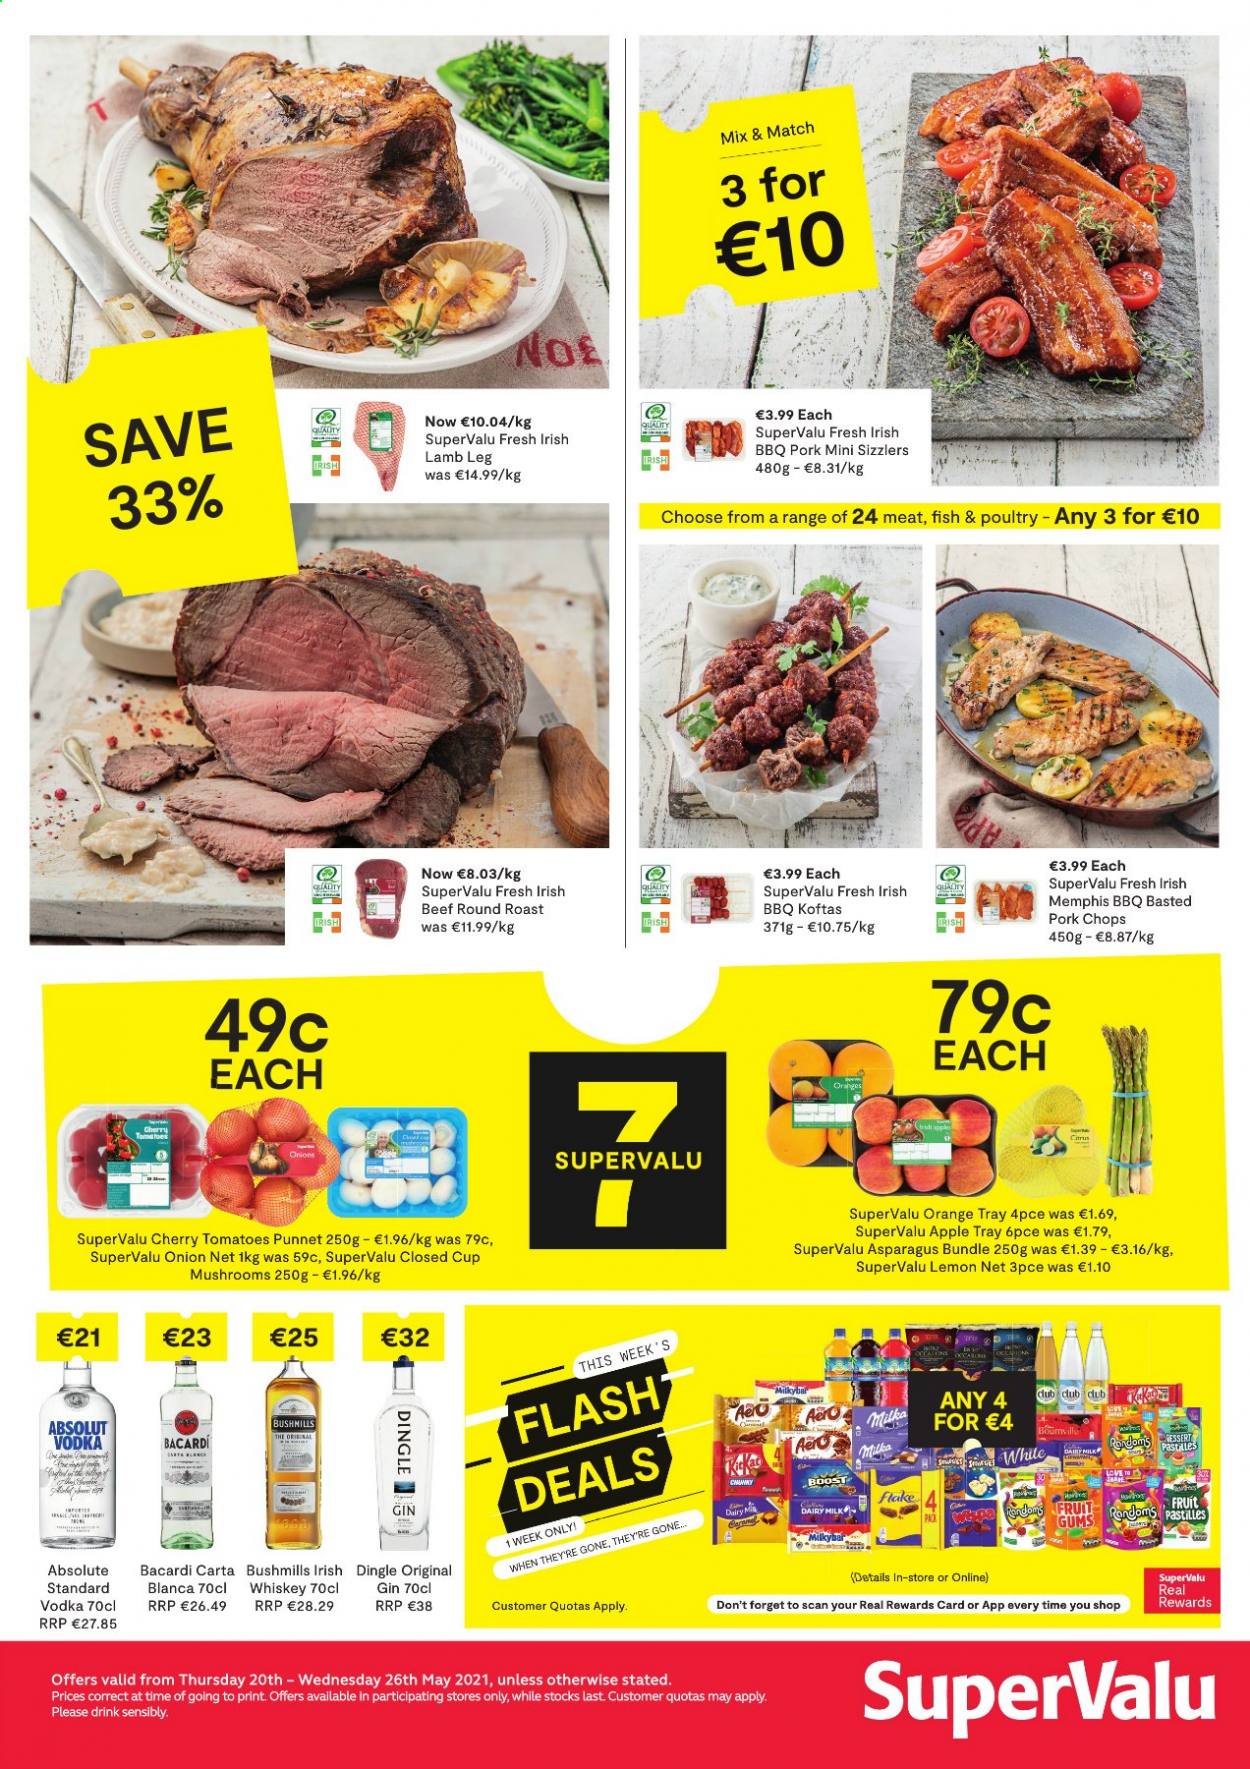 thumbnail - SuperValu offer  - 20.05.2021 - 26.05.2021 - Sales products - asparagus, tomatoes, onion, oranges, fish, milky bar, pastilles, Dairy Milk, Boost, Bacardi, gin, vodka, whiskey, Absolut, whisky, beef meat, round roast, pork chops, pork meat, lamb meat, lamb leg. Page 1.